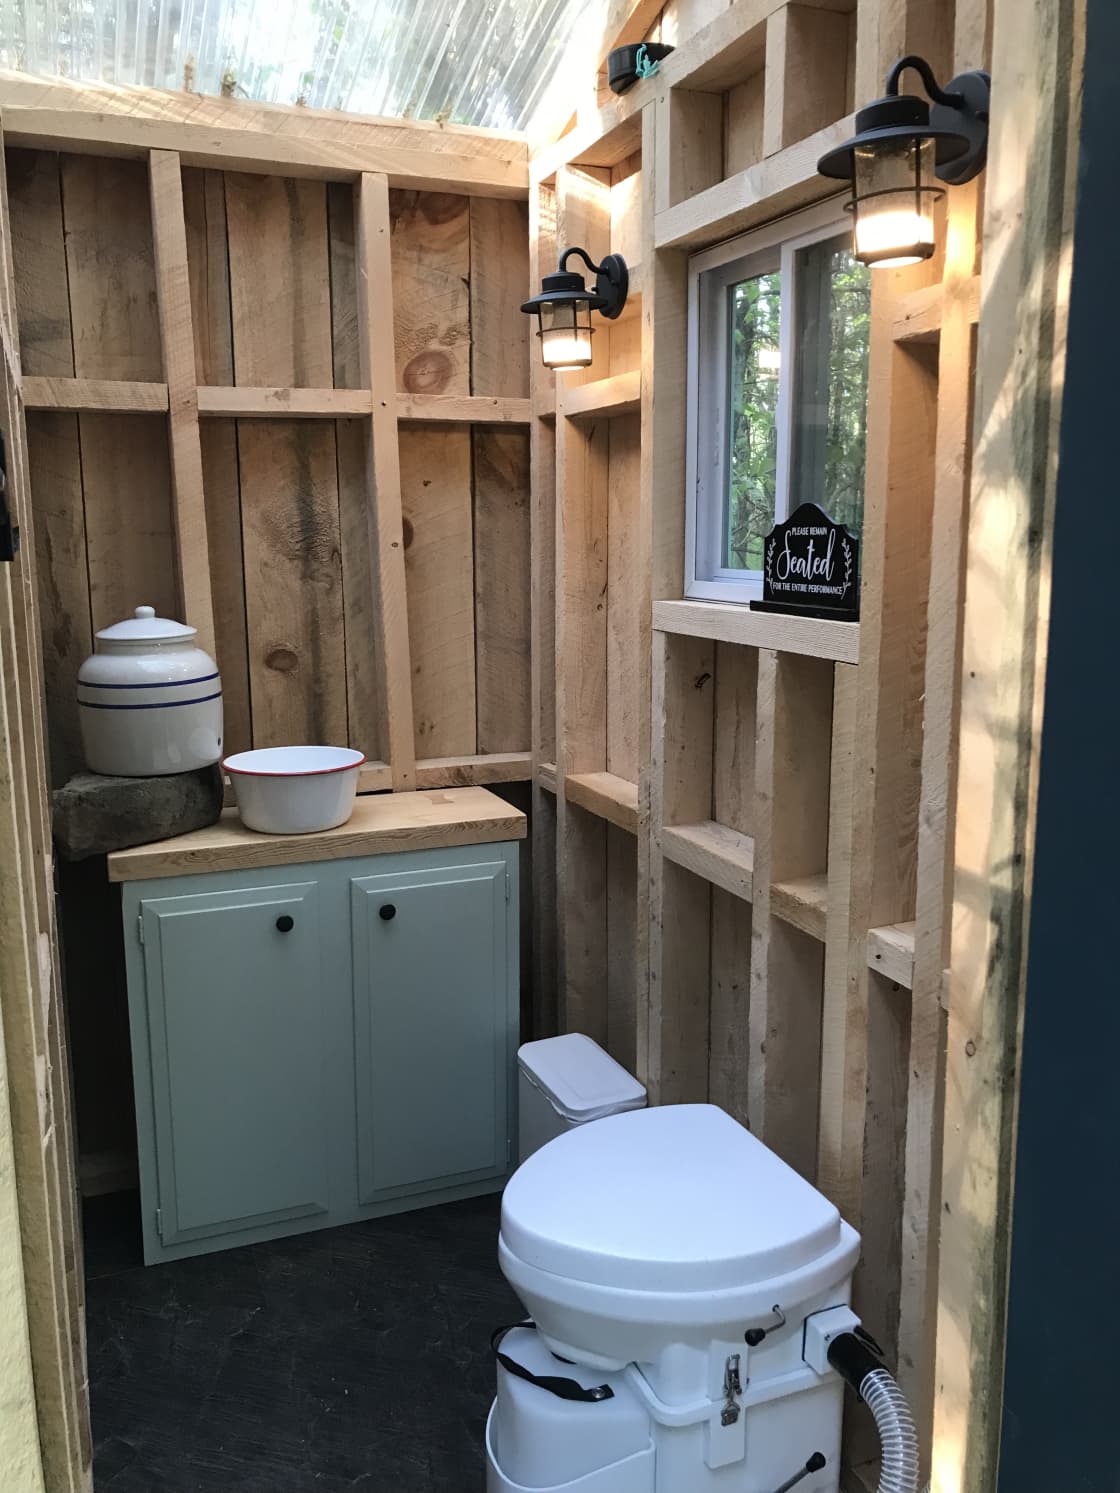 Bathroom with compost toilet and hand washing area.